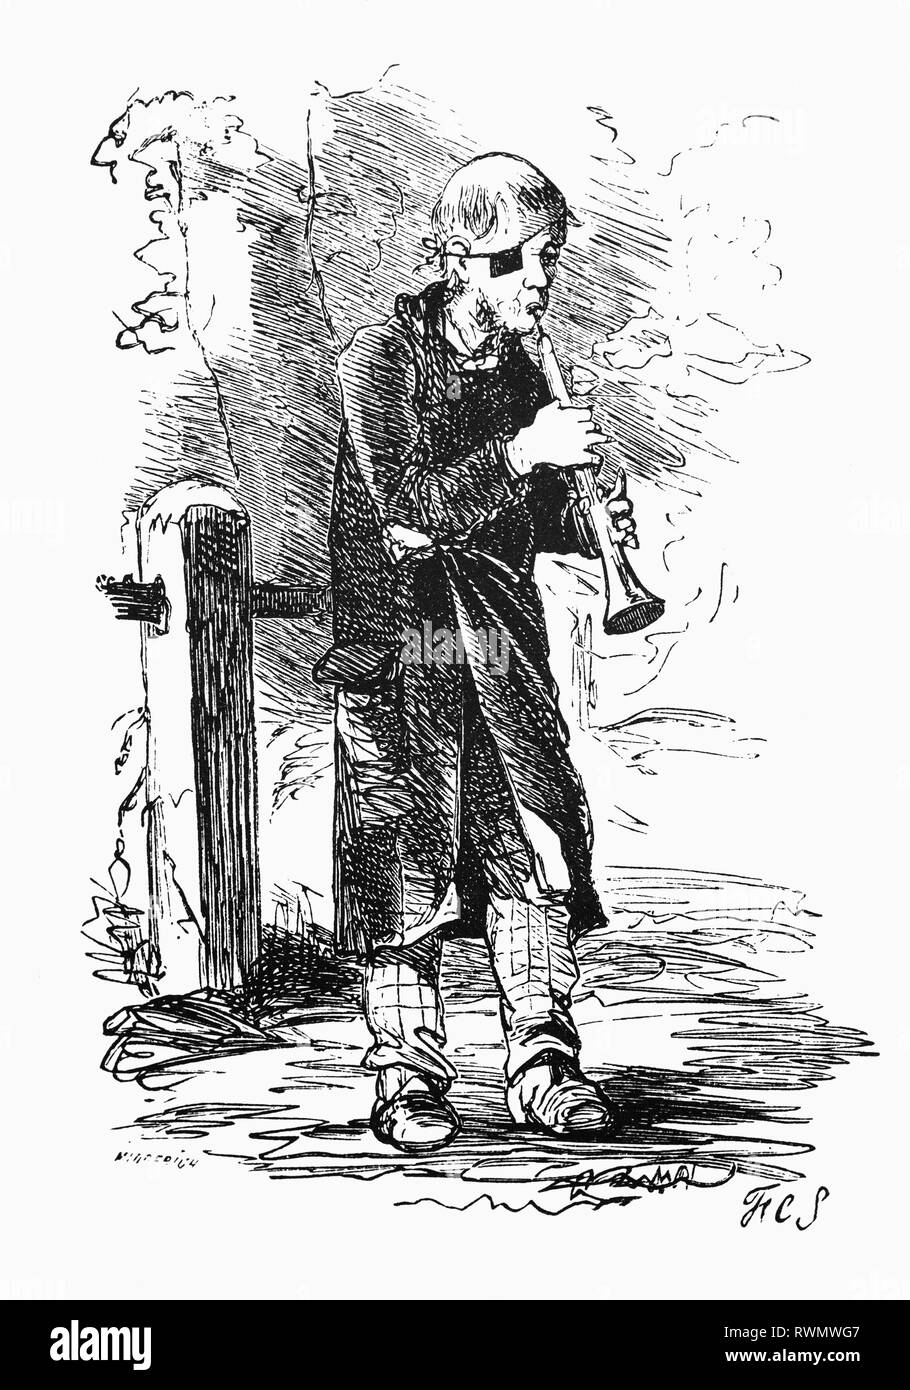 A down-at-heel 19th Century clarinetist who has fallen on hard times playing in Haarlem, The Netherlands. From the Camera Obscura, a collection of Dutch humorous-realistic essays, stories and sketches in which Hildebrand, the author, takes an ironic look at the behavior of the 'well-to-do', finding  them bourgeois and without a good word for them. Stock Photo